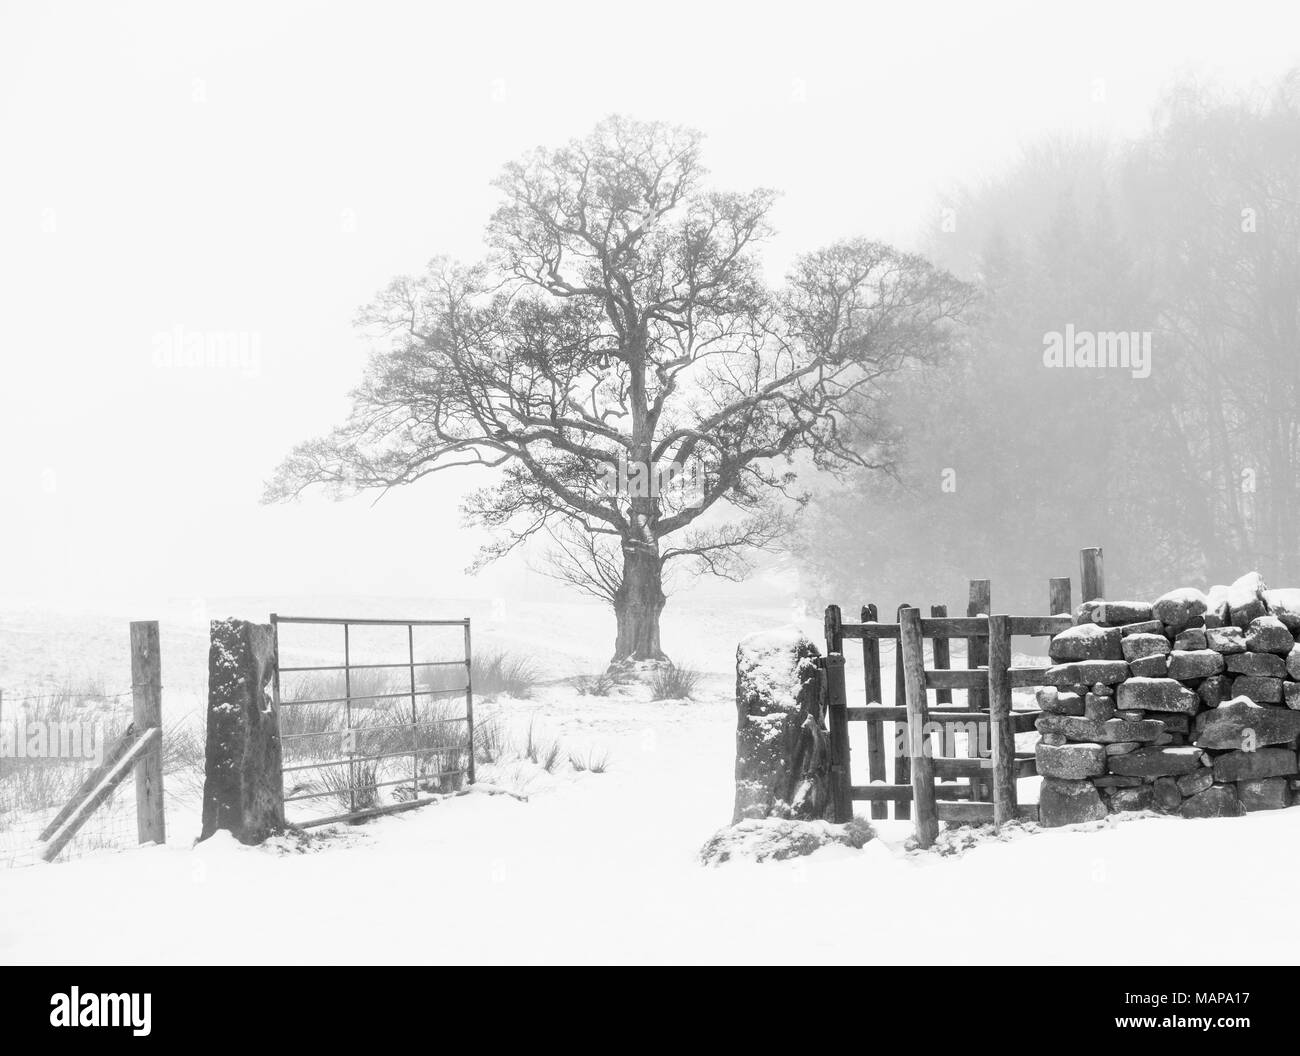 Simple black and white image of a snowy tree scene in the Yorkshire countryside with kissing gate and an open gate Stock Photo